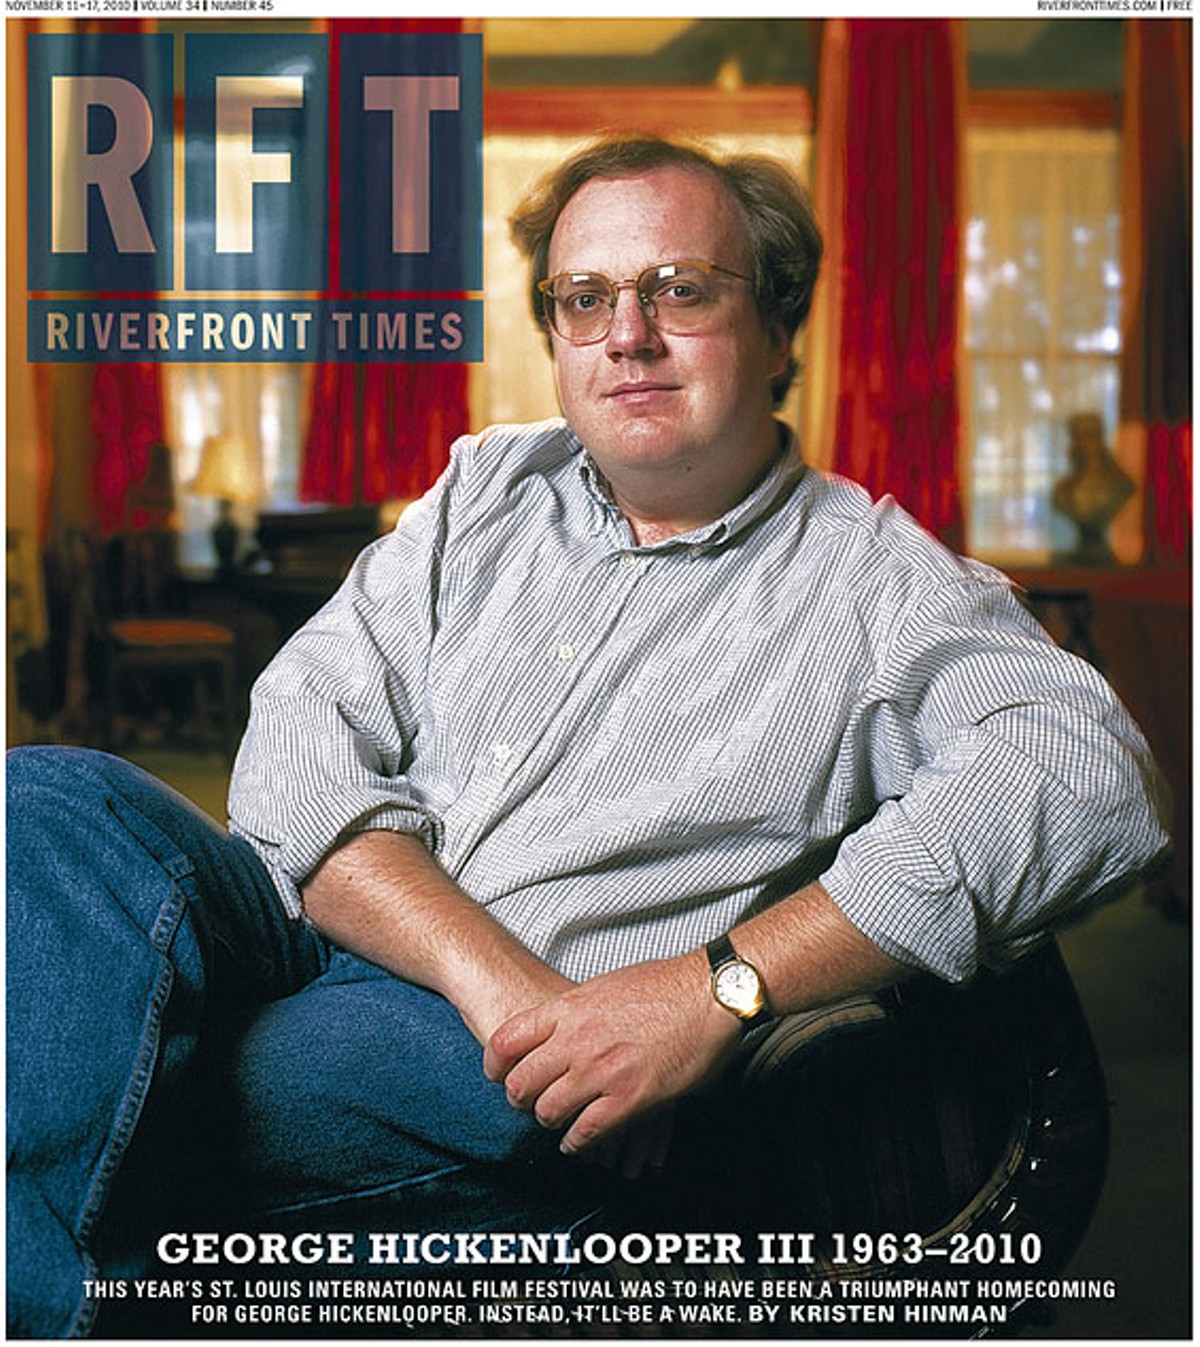 The Cover of the November 11 Print Edition